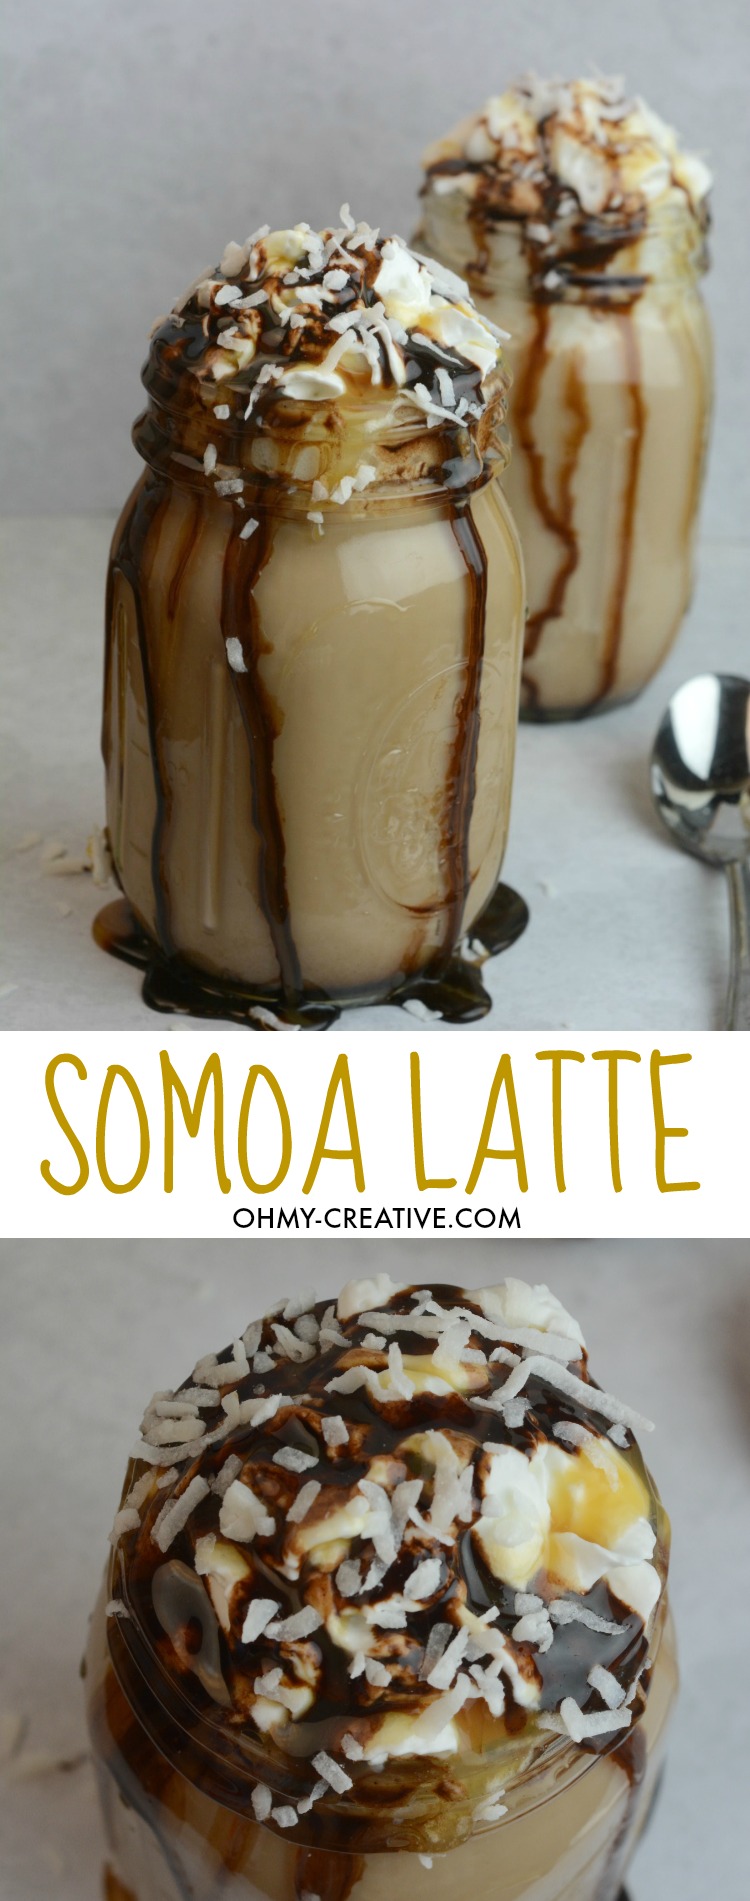 While you can only buy Girl Scout Cookies once a year you can make this amazing Somoa Latte Recipe any time! Dripping with caramel and chocolate sauces topped with whipped cream and toasted coconut, this Somoa Latte will be hard to resist! | OHMY-CREATIVE.COM